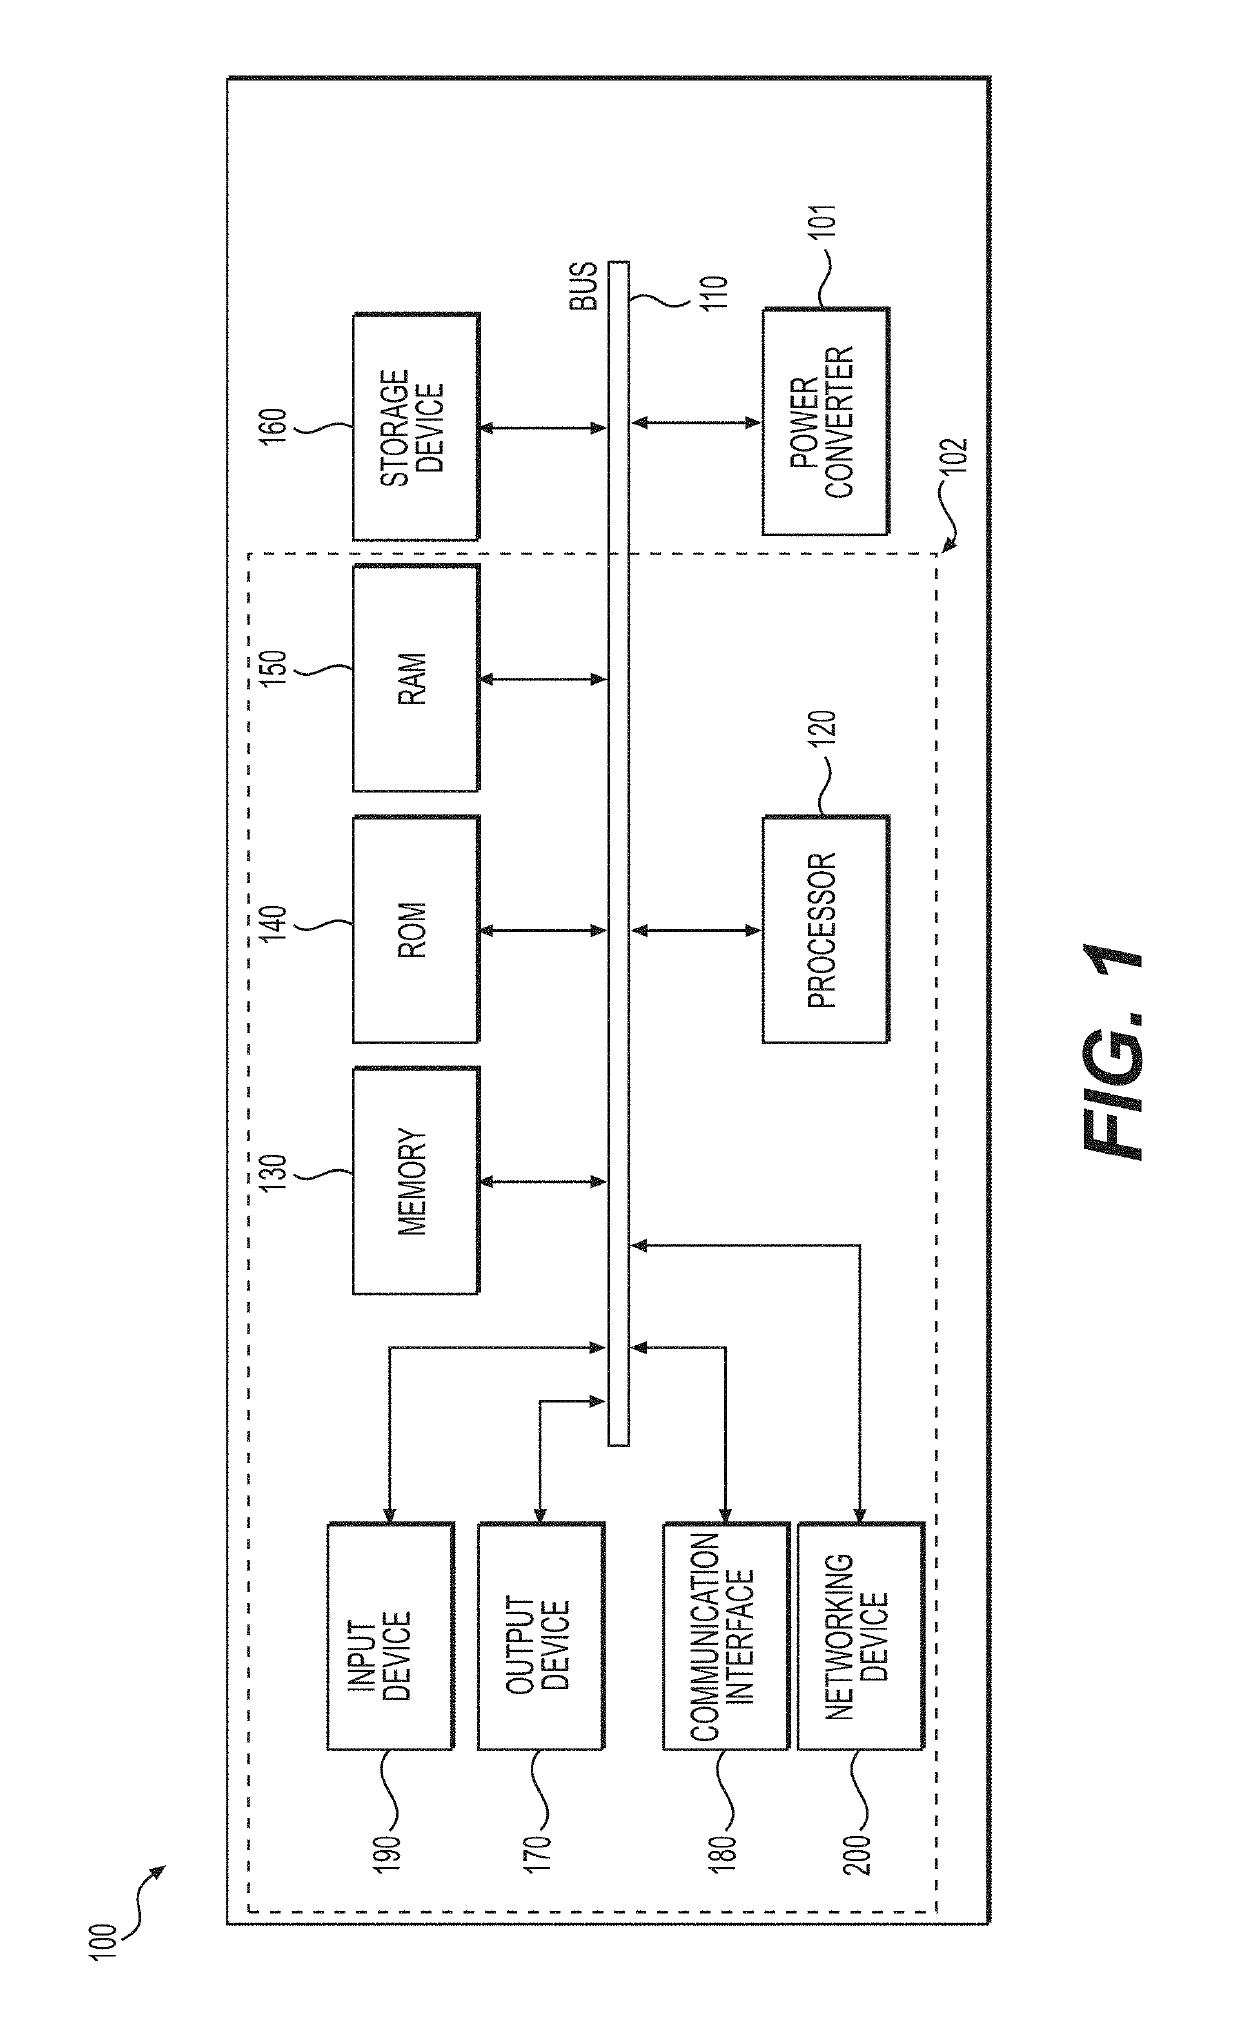 Devices and methods of calculating and displaying continuously monitored tidal breathing flow-volume loops (TBFVL) obtained by non-invasive impedance-based respiratory volume monitoring